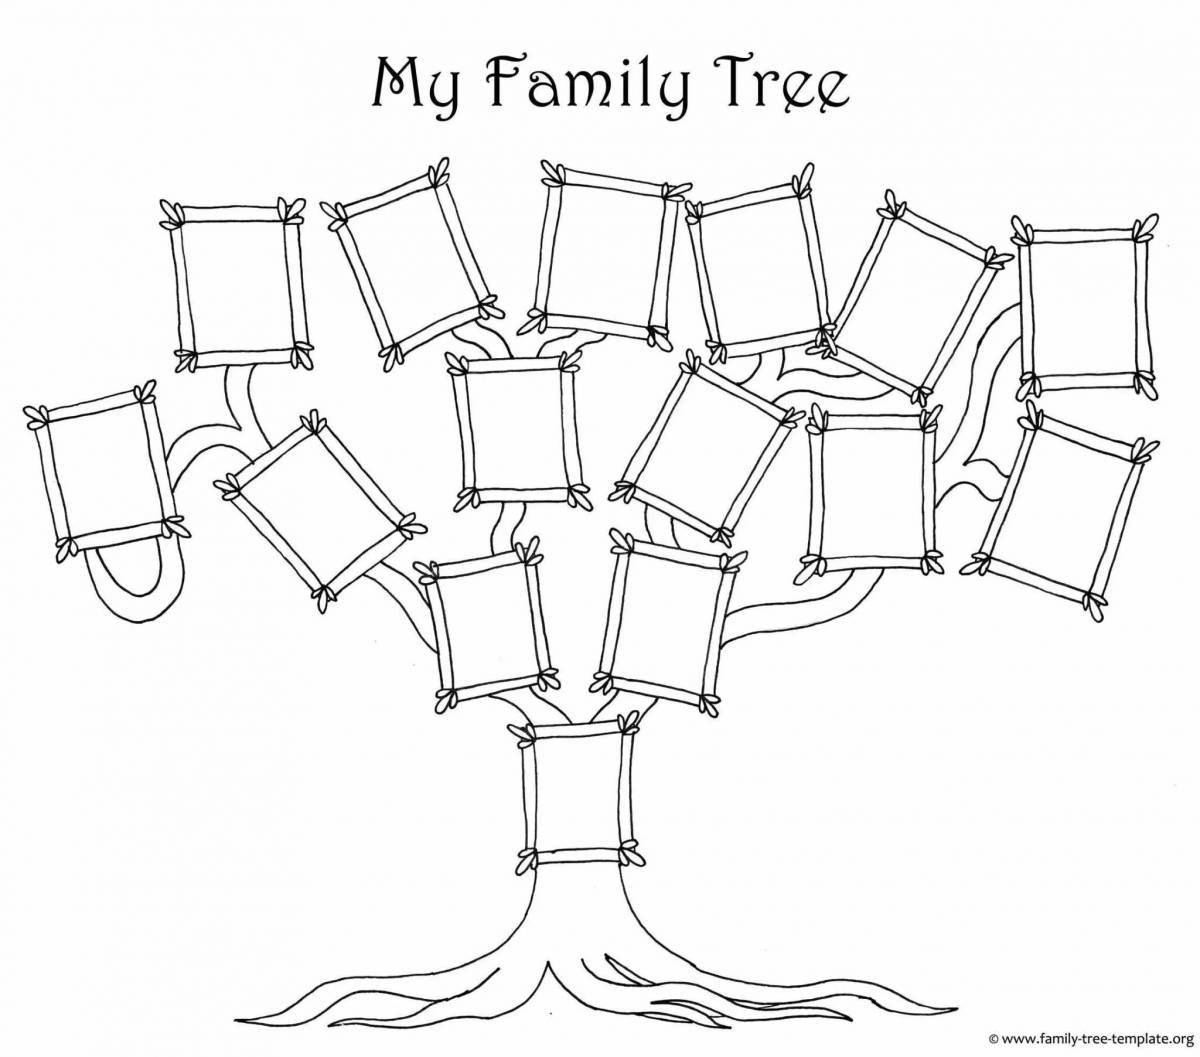 Intriguing coloring tree template